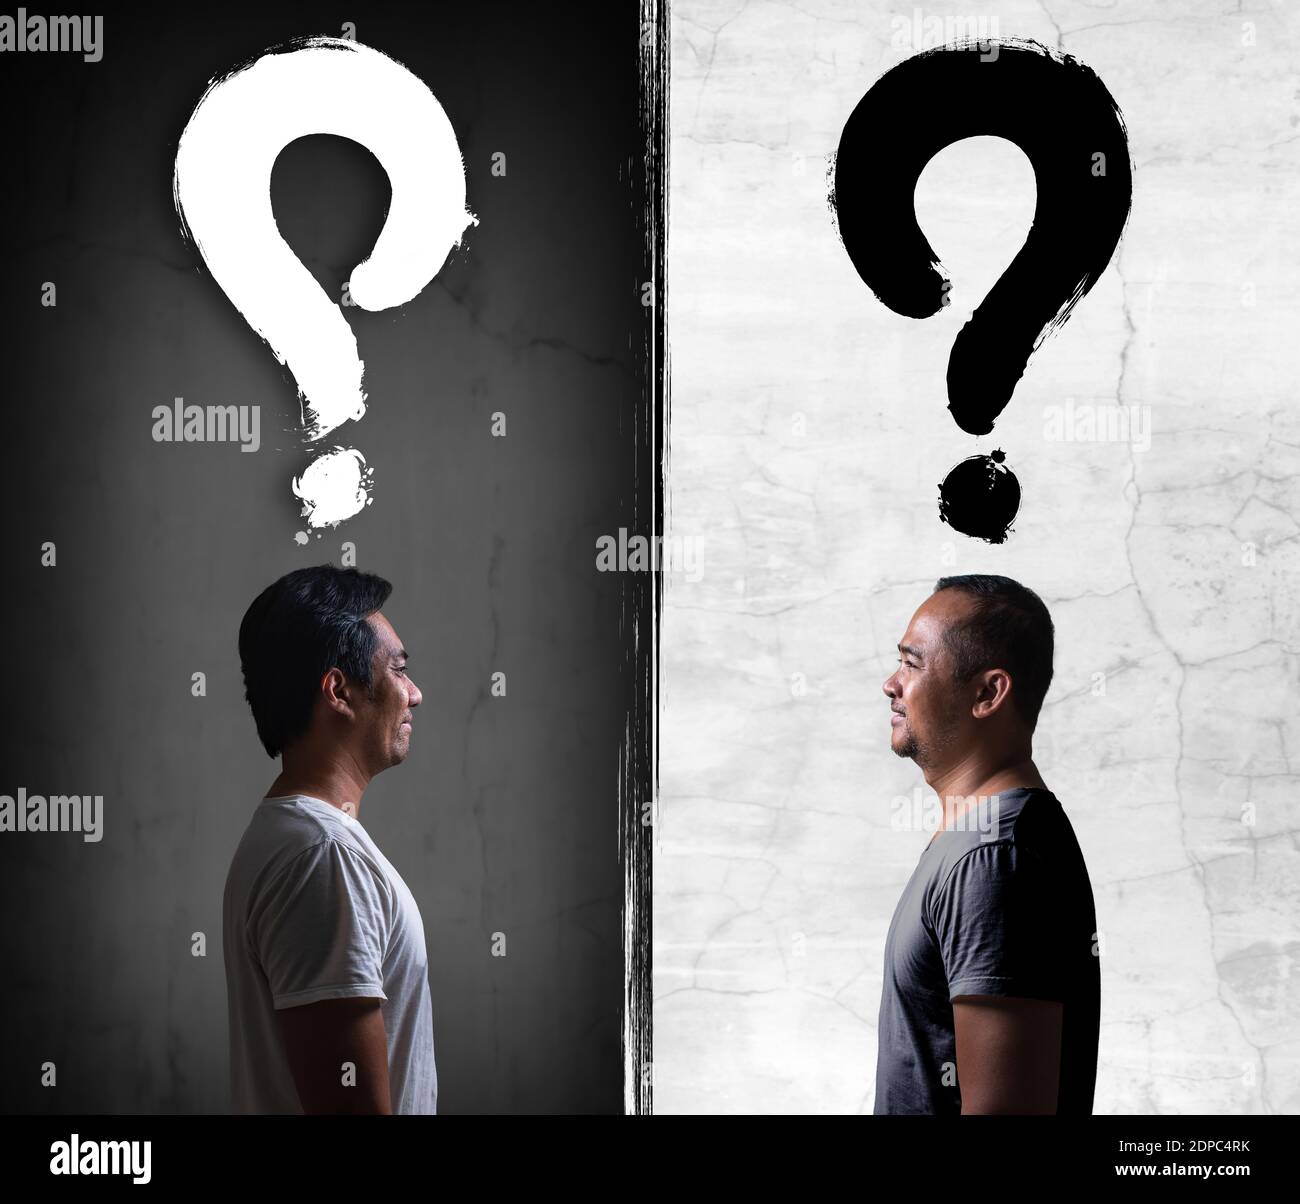 Asian man with question mark on a balck and white background Stock Photo